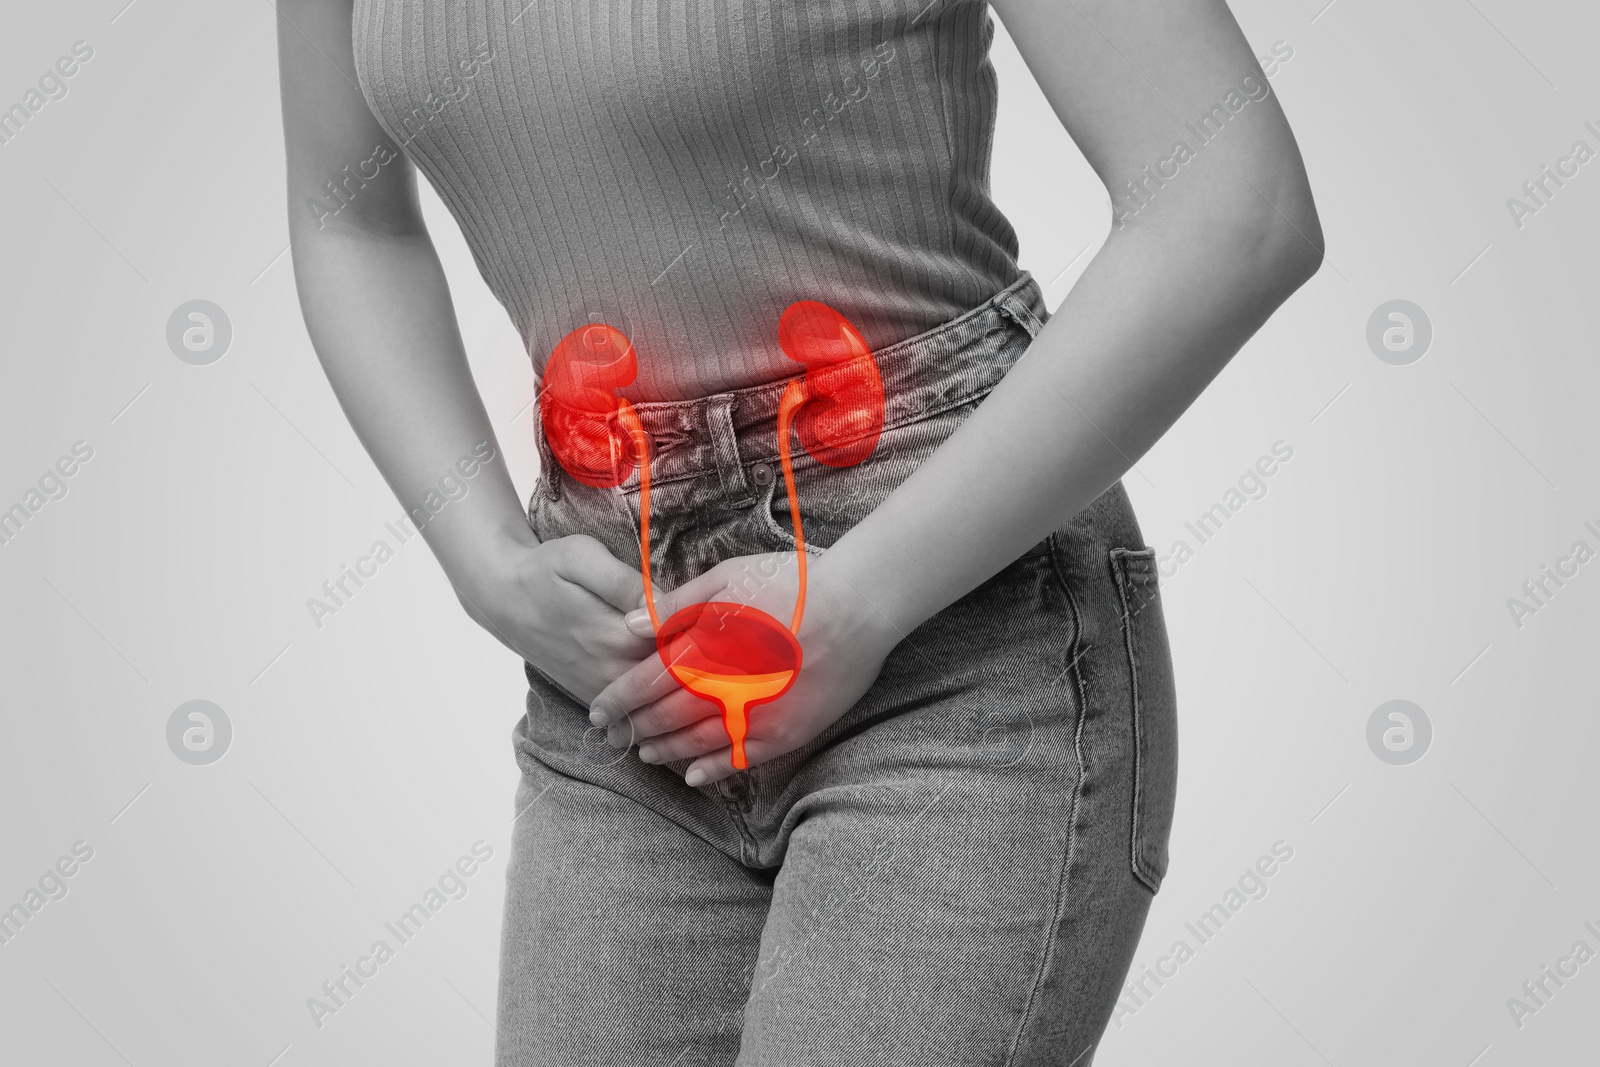 Image of Woman suffering from cystitis on light background, closeup. Illustration of urinary system